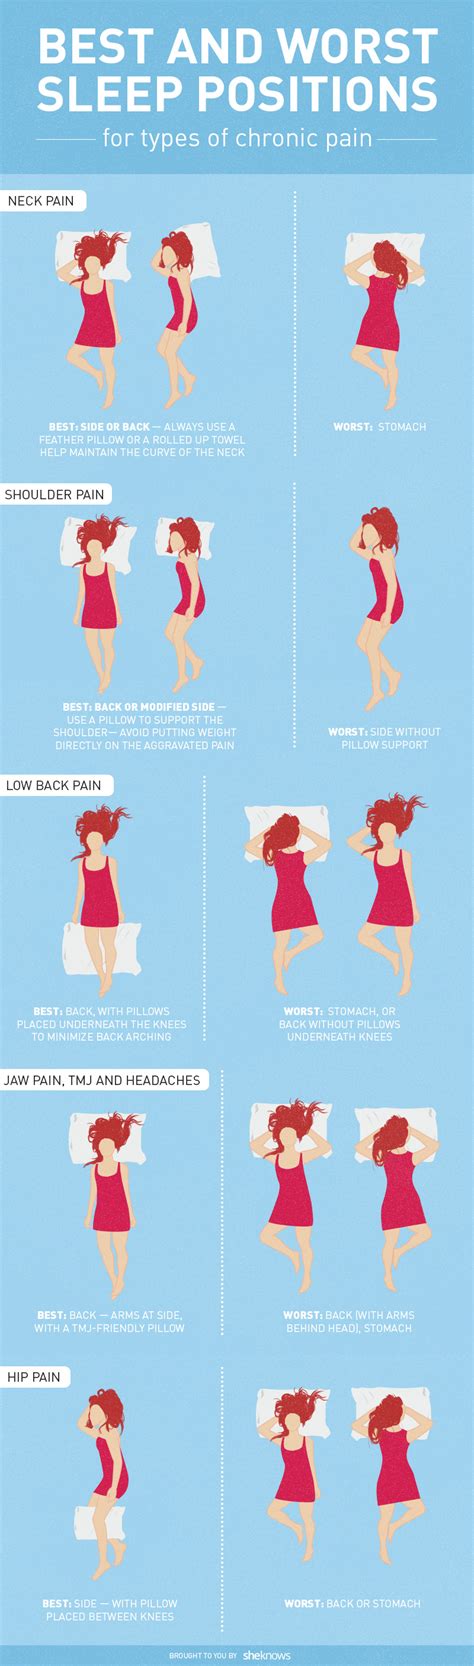 The Best And Worst Sleeping Positions For Chronic Pain